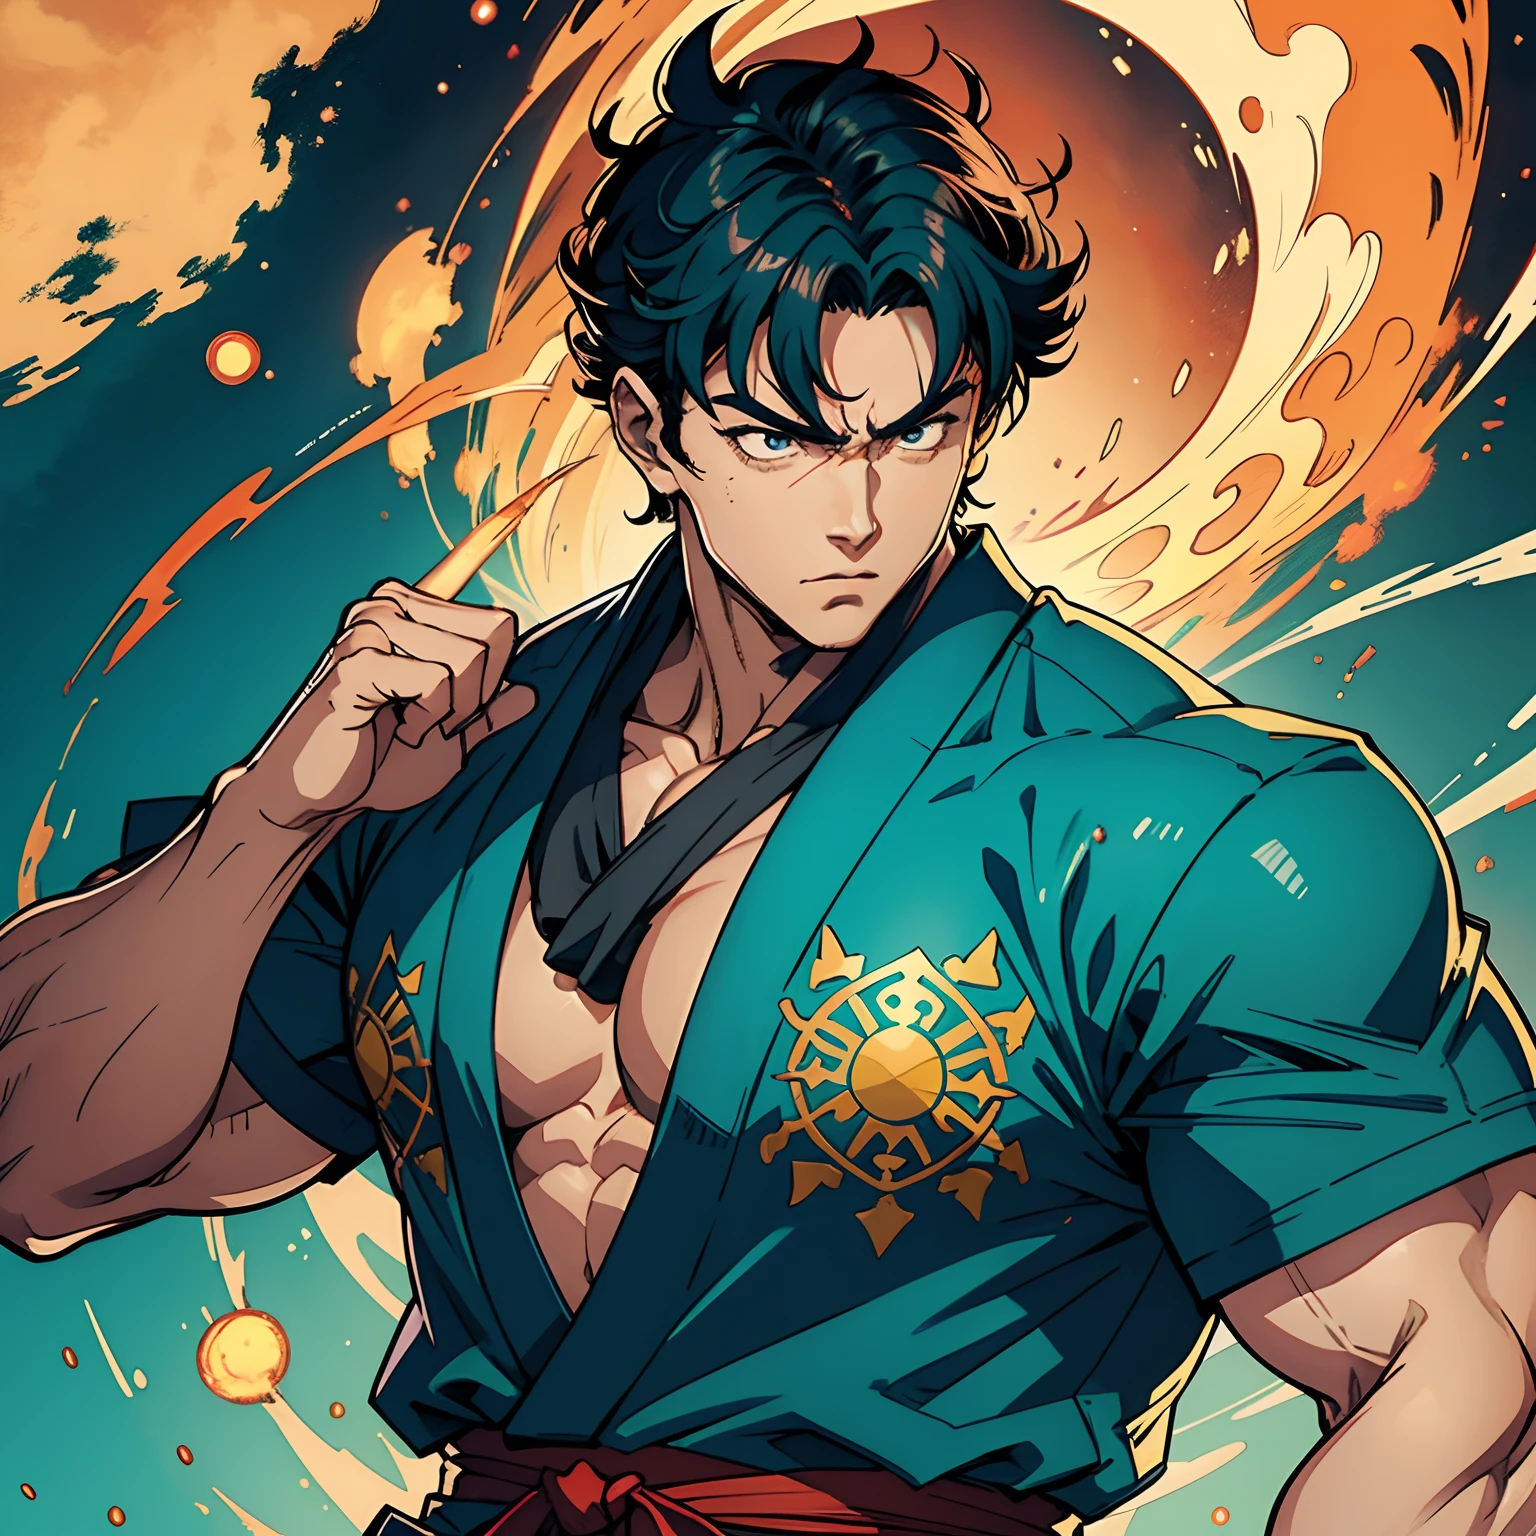 Create a detailed description of Thorne Phoenix, A person in his early 40s who possesses an impressive and formidable physique, que recuerda a la asombrosa musculatura de figuras como Retsu Kaioh de Baki o Biscuit Oliva.. Thorne is dressed in a striking kung fu kimono with vibrant turquoise and red colors.., with a particular emphasis on these tones. The kimono is adorned with four ornate buttons: uno en el cuello, dos en los antebrazos, and one hanging from an earlobe. Los ricos de Thorne, The tanned complexion complements the incredible definition of the muscles that ripple beneath the fabric, exudando un aire de fuerza y resistencia incomparables. El pelo corto de Thorne, similar a Ryu's, is neatly arranged in a style that includes distinctive ponytails, adding to its unique appearance. Su robusto, The male face with sharp features is framed by this hairstyle. She also wears a scarf in the same vibrant turquoise and red colors...